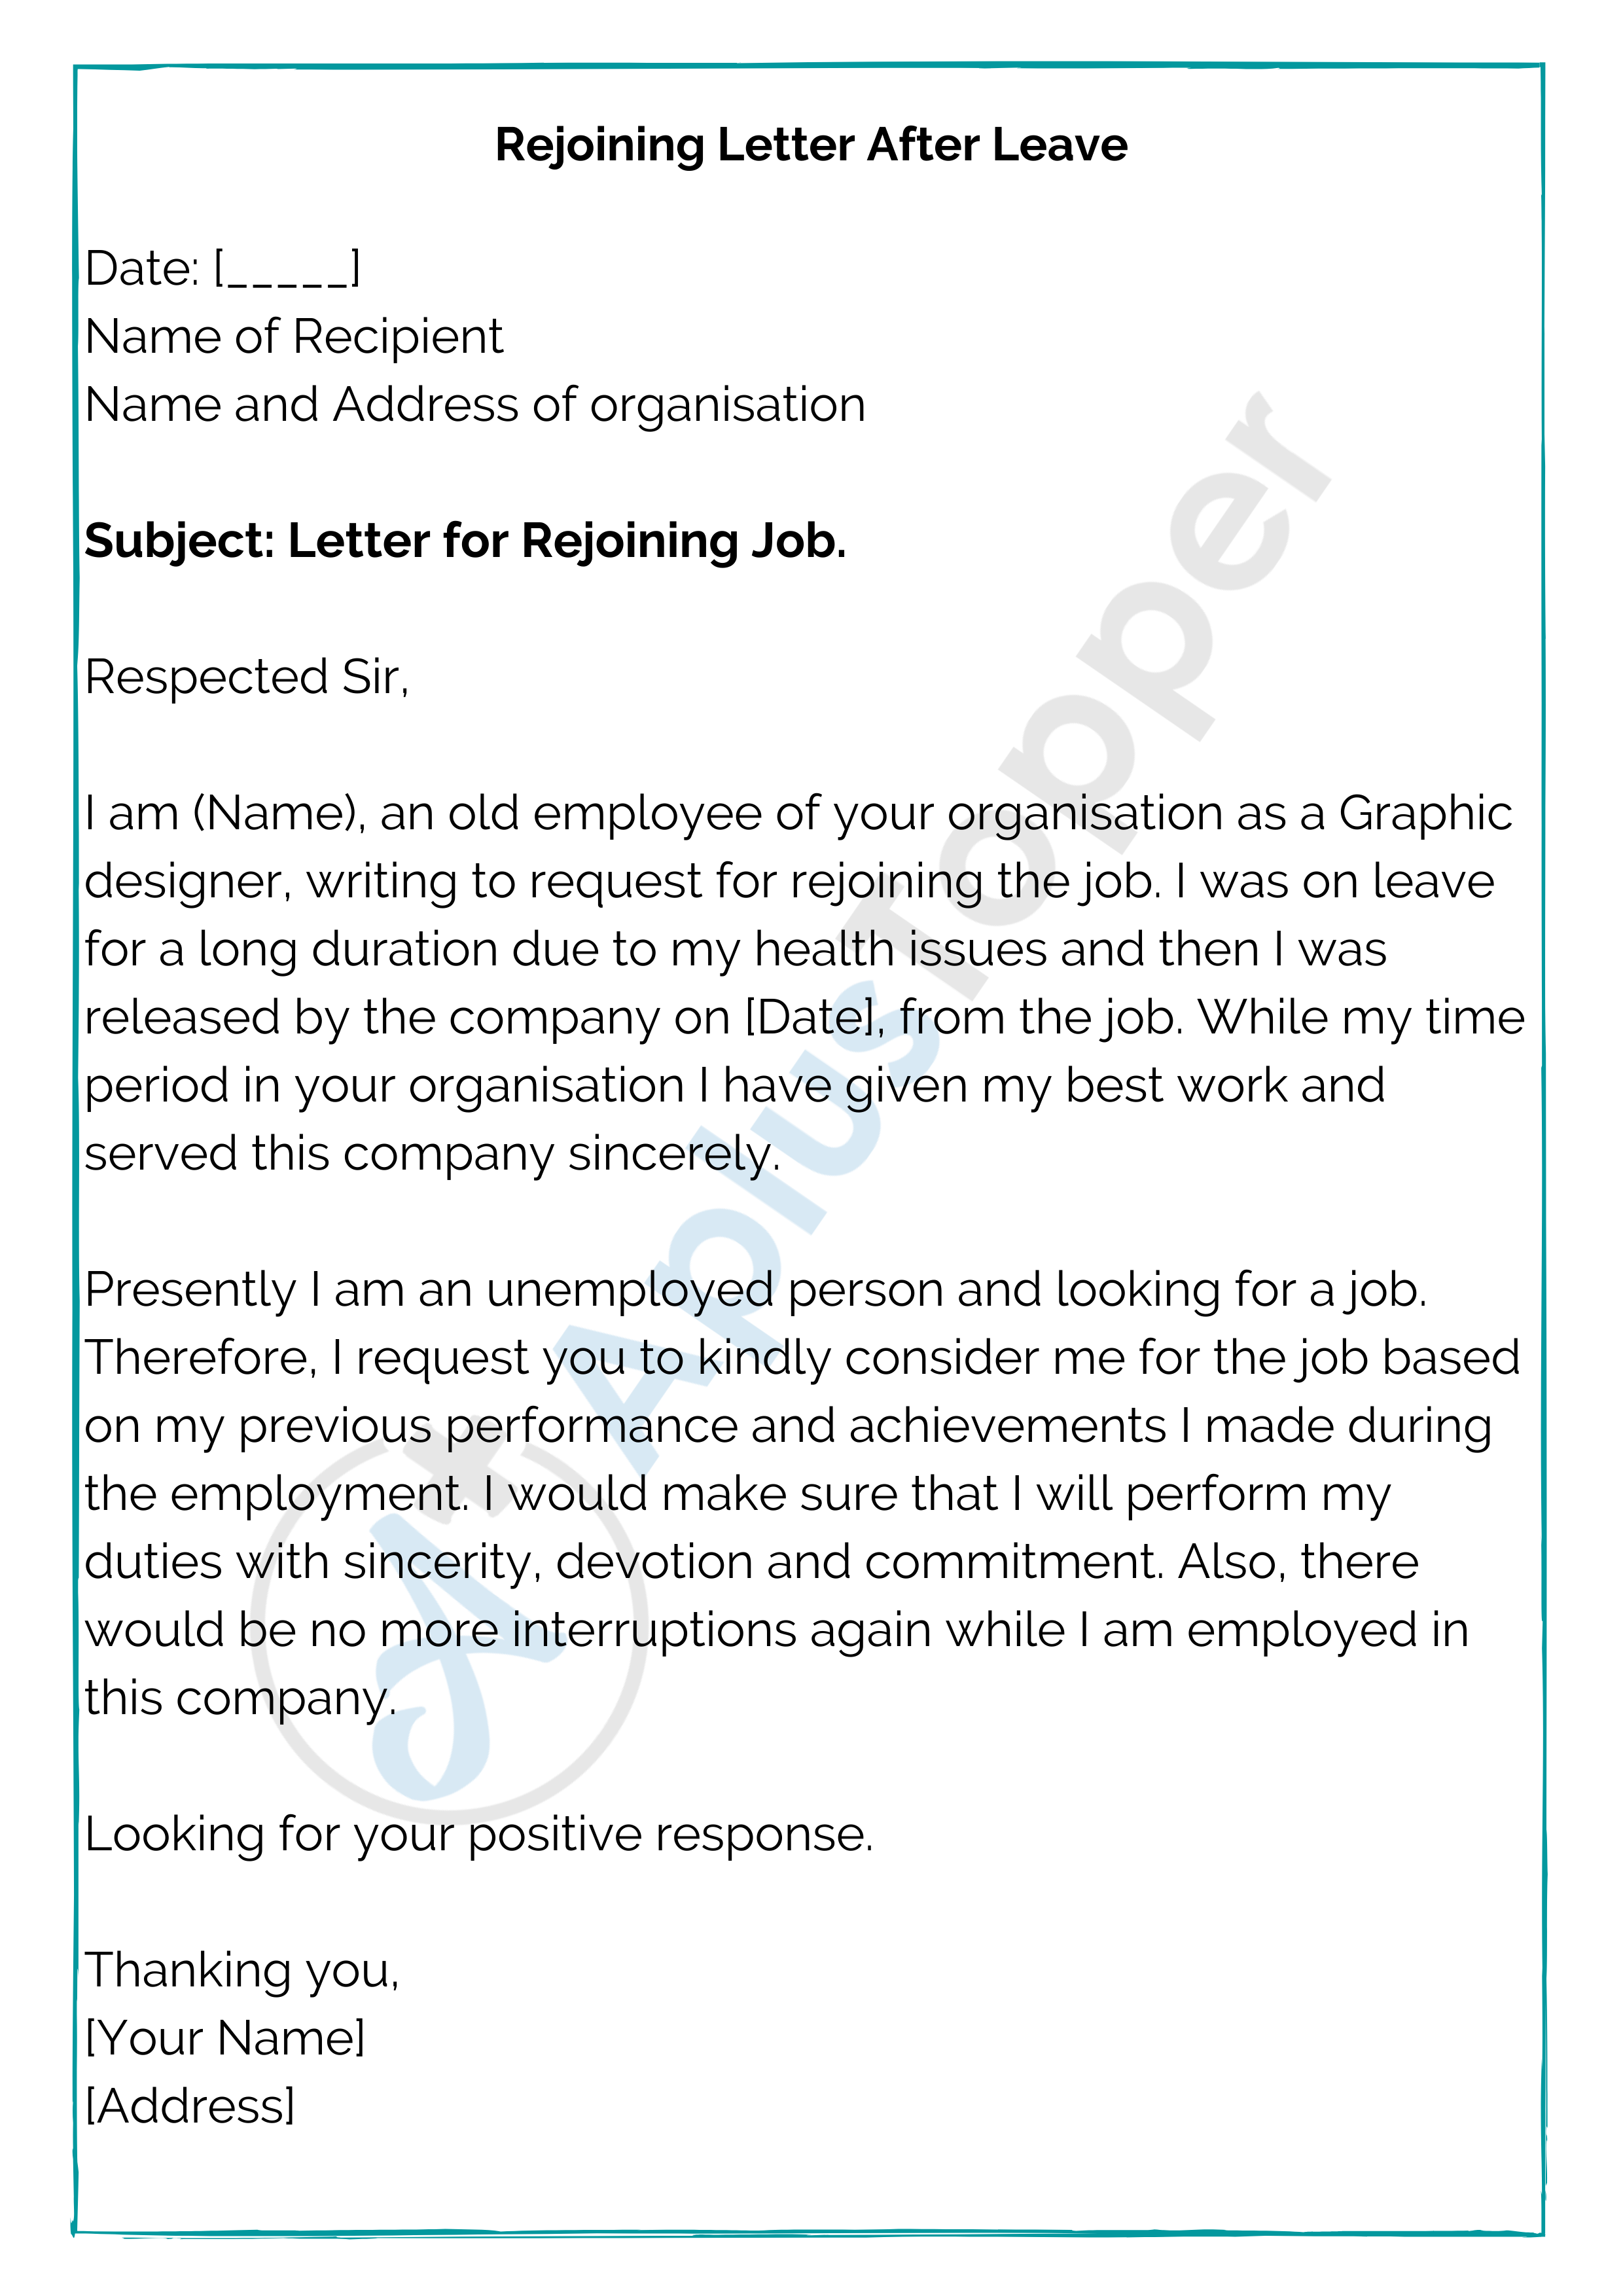 sample letter to resume work after maternity leave